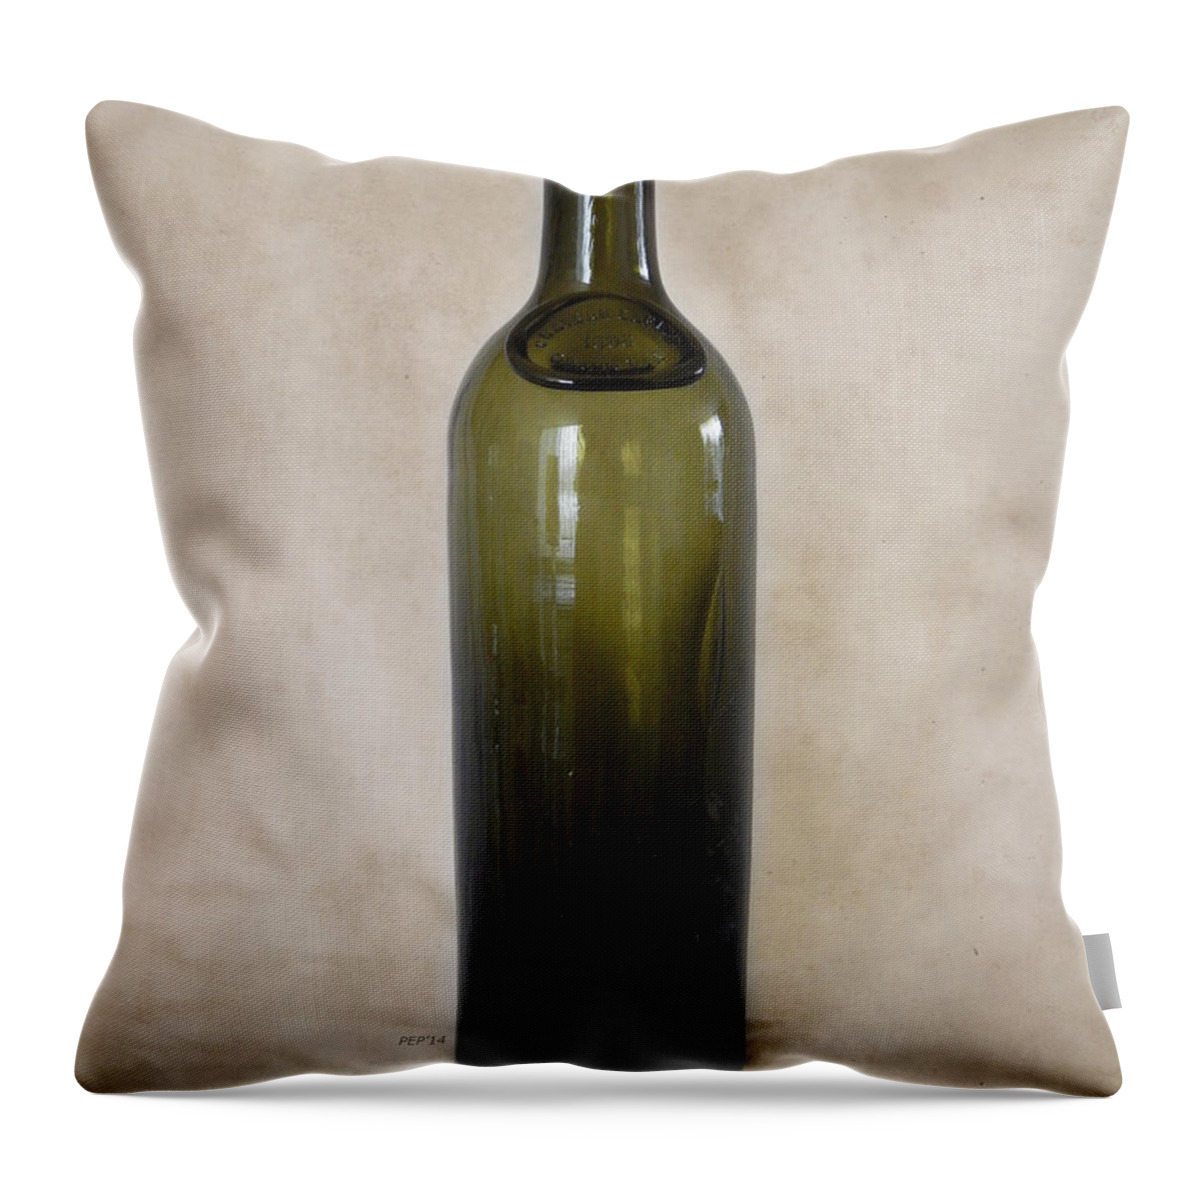 Old Bottle Throw Pillow featuring the photograph Vintage Glass Bottle by Phil Perkins